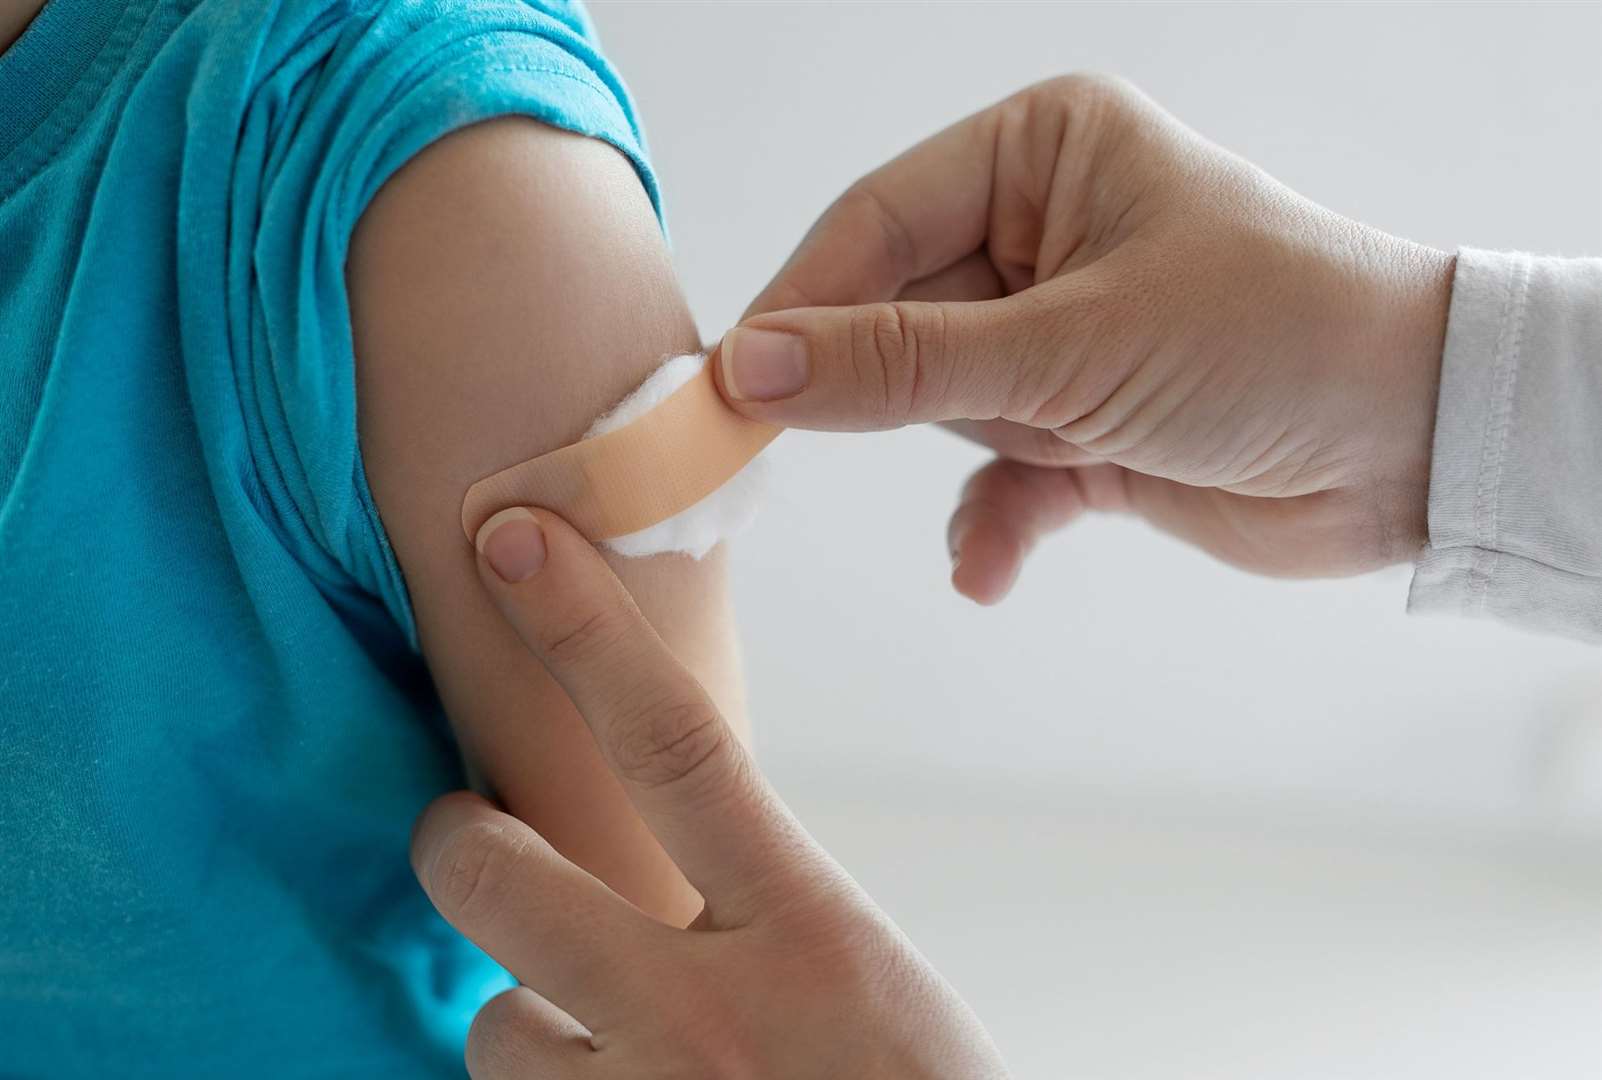 The clinics are hoping to reach children and teens missing vital immunisations. Image: iStock.